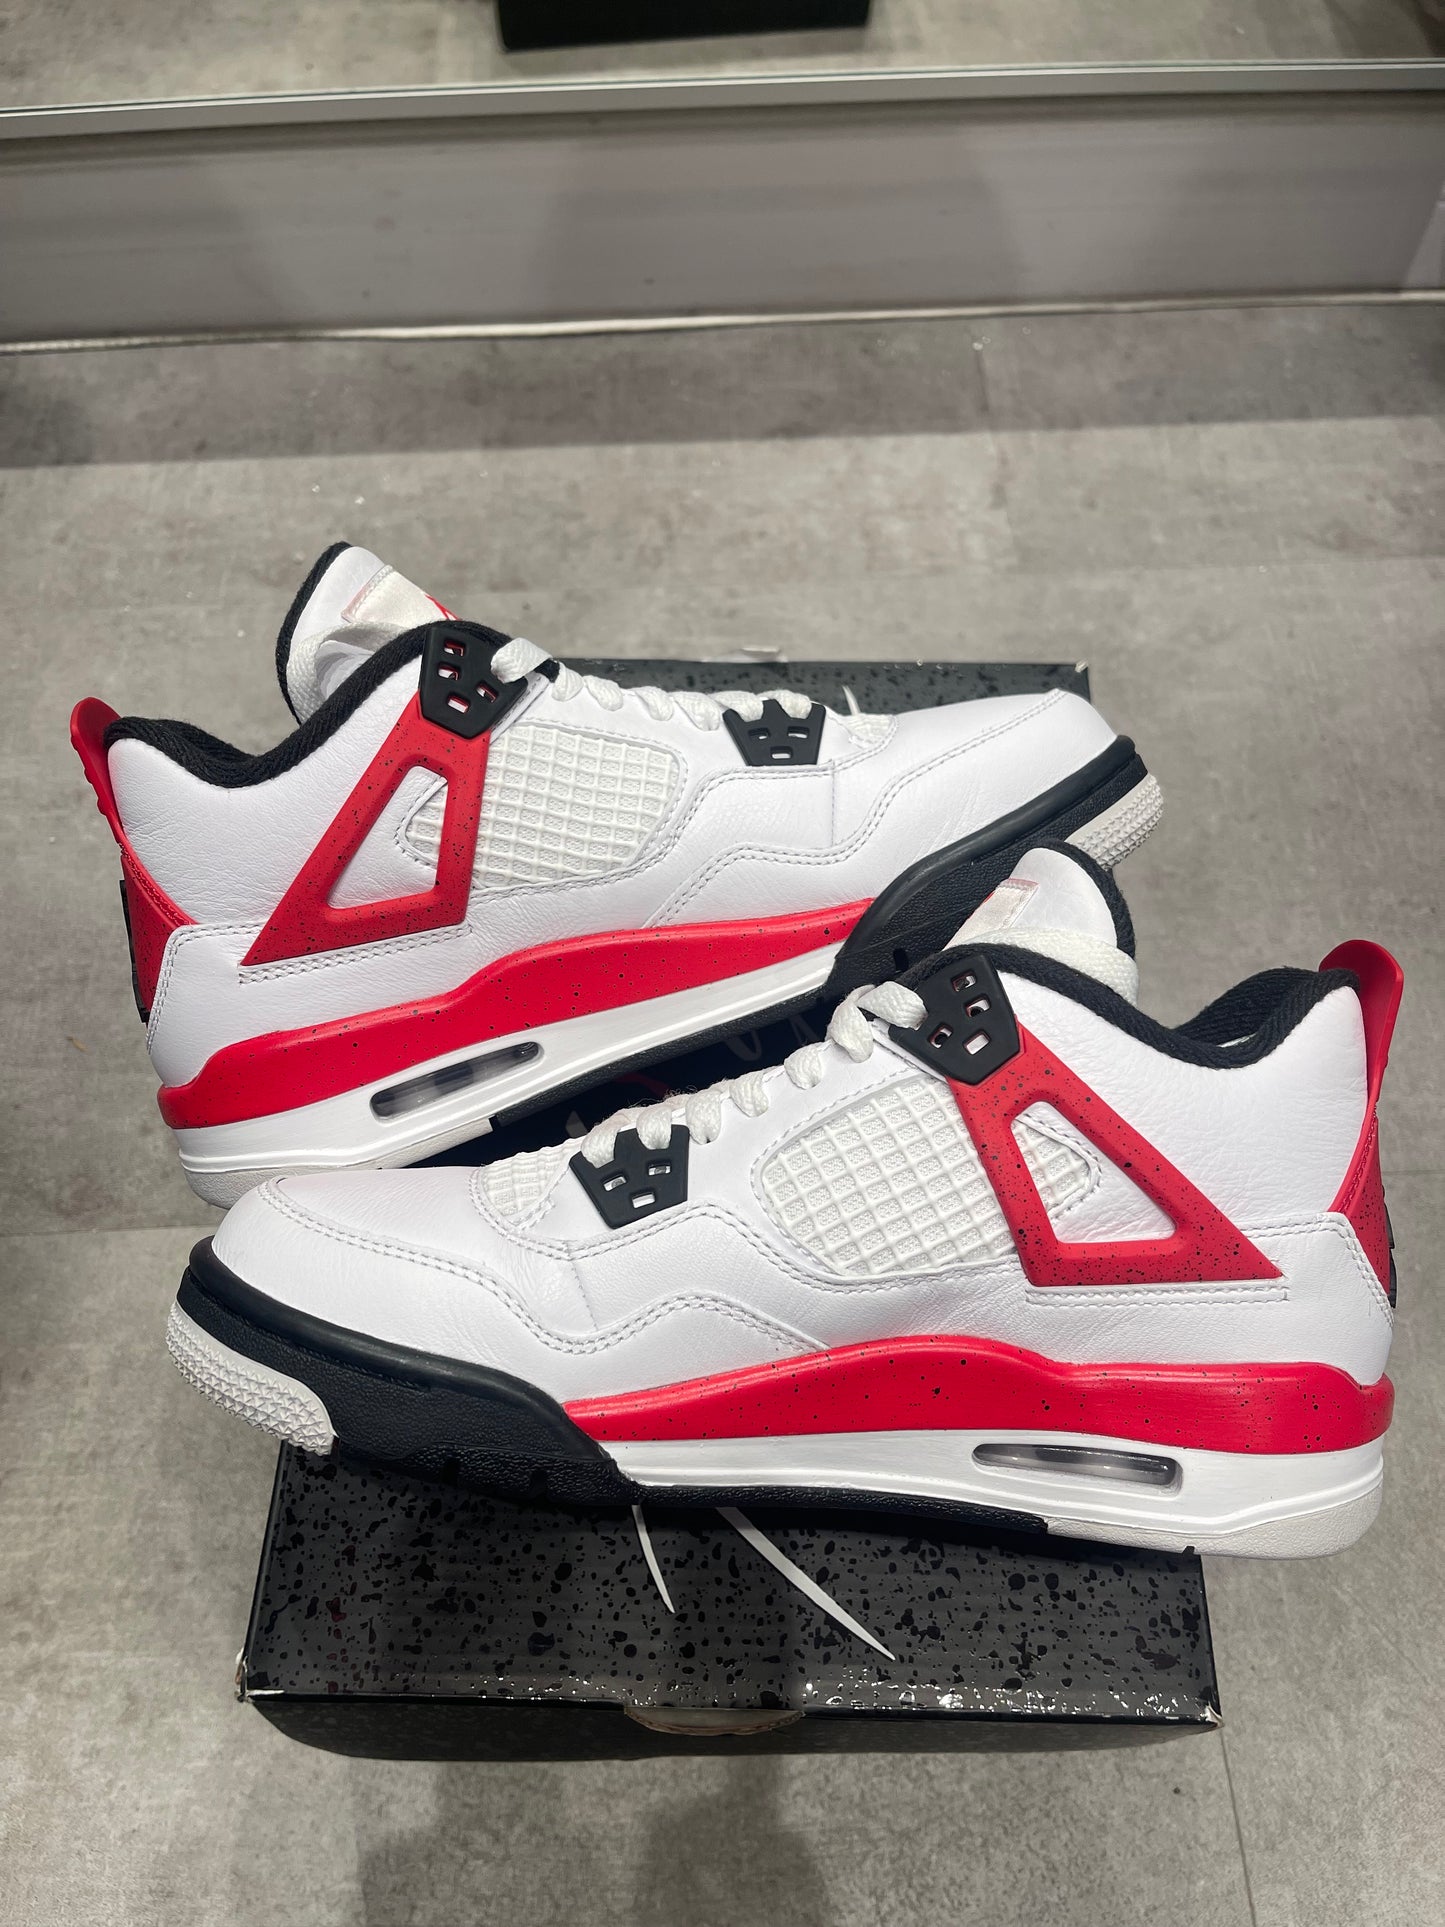 Jordan 4 Red Cement (GS) (Preowned)